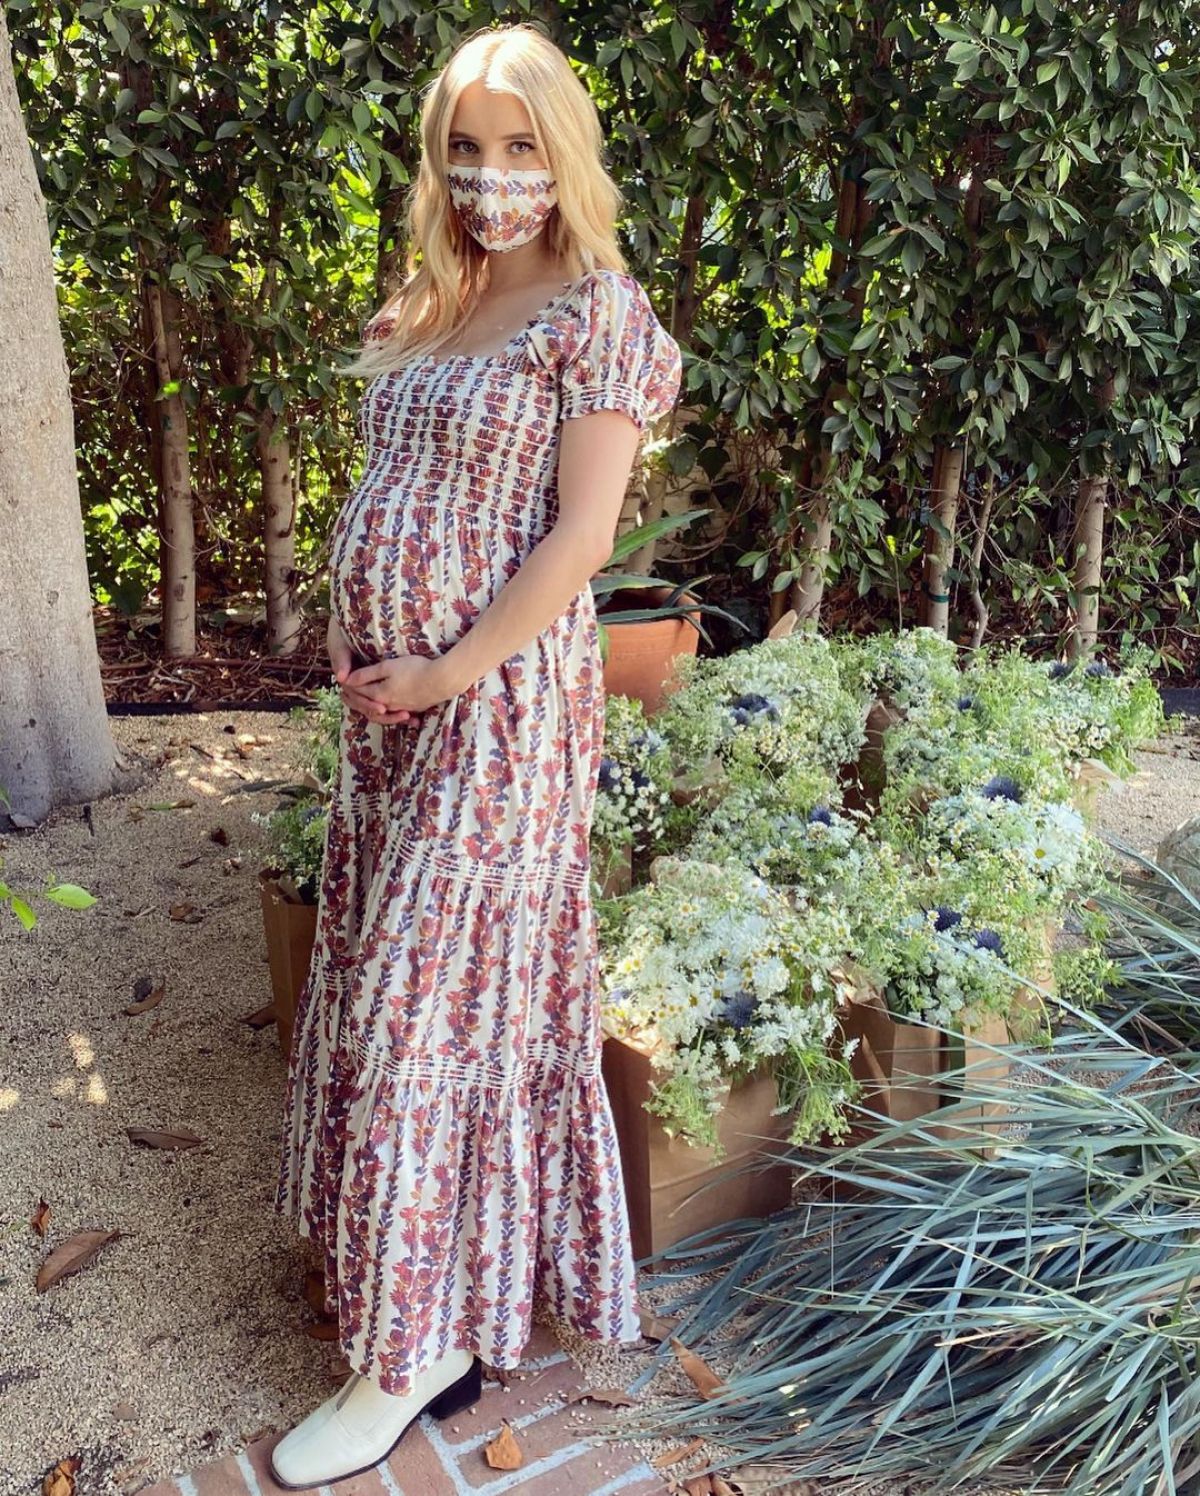 Pregnant Emma Roberts shows off Baby Bump in Floral Dress - Instagram Photos 10/28/2020 1